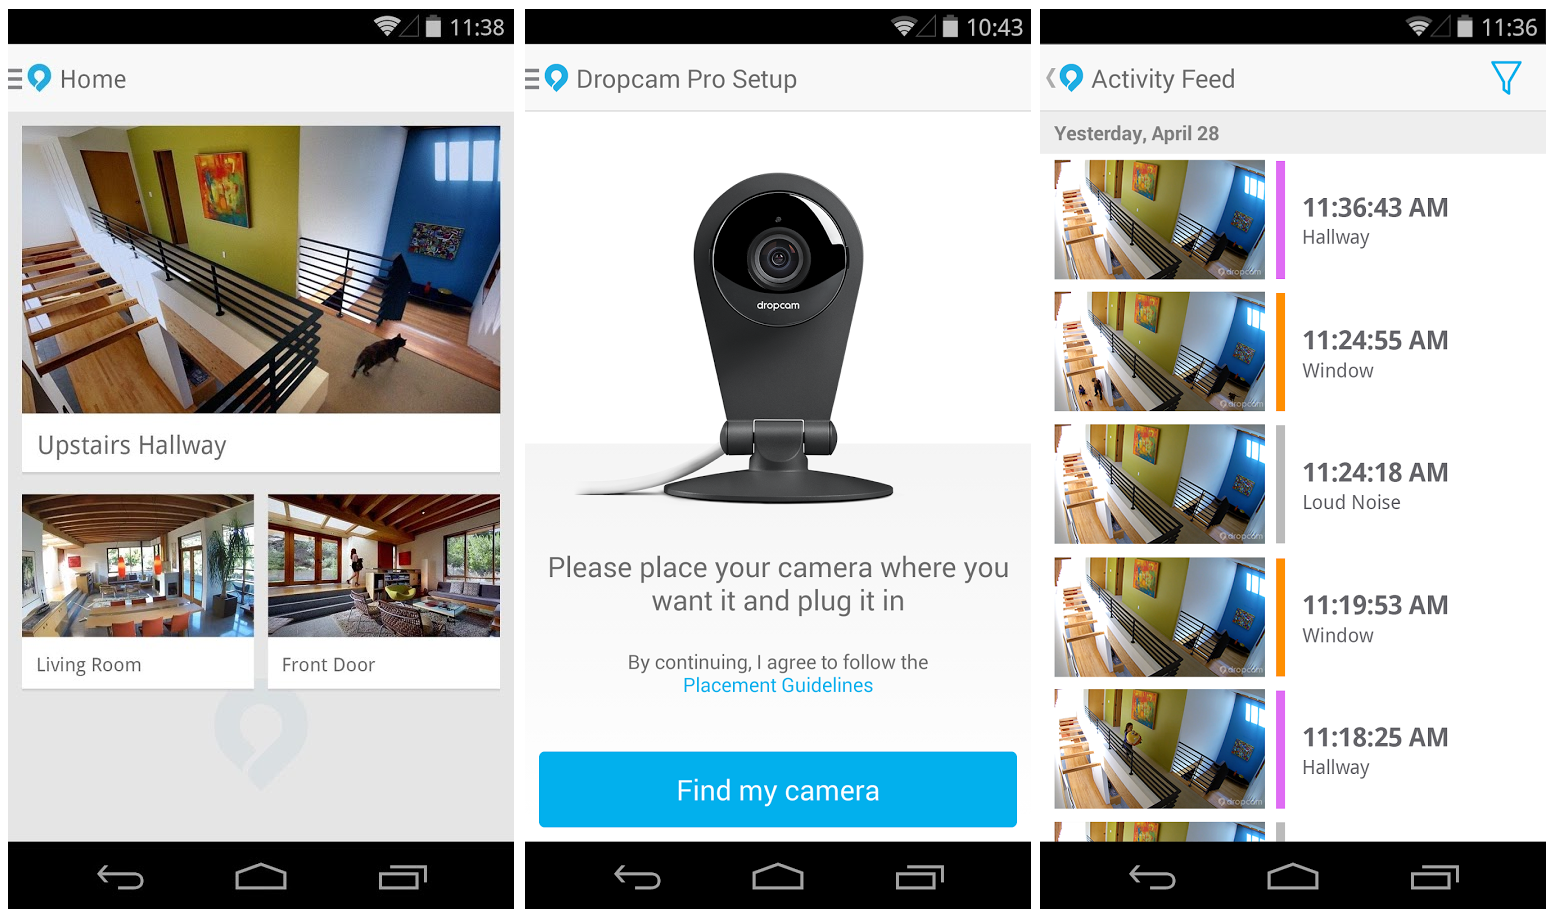 Google's Nest to Acquire Dropcam for $555m